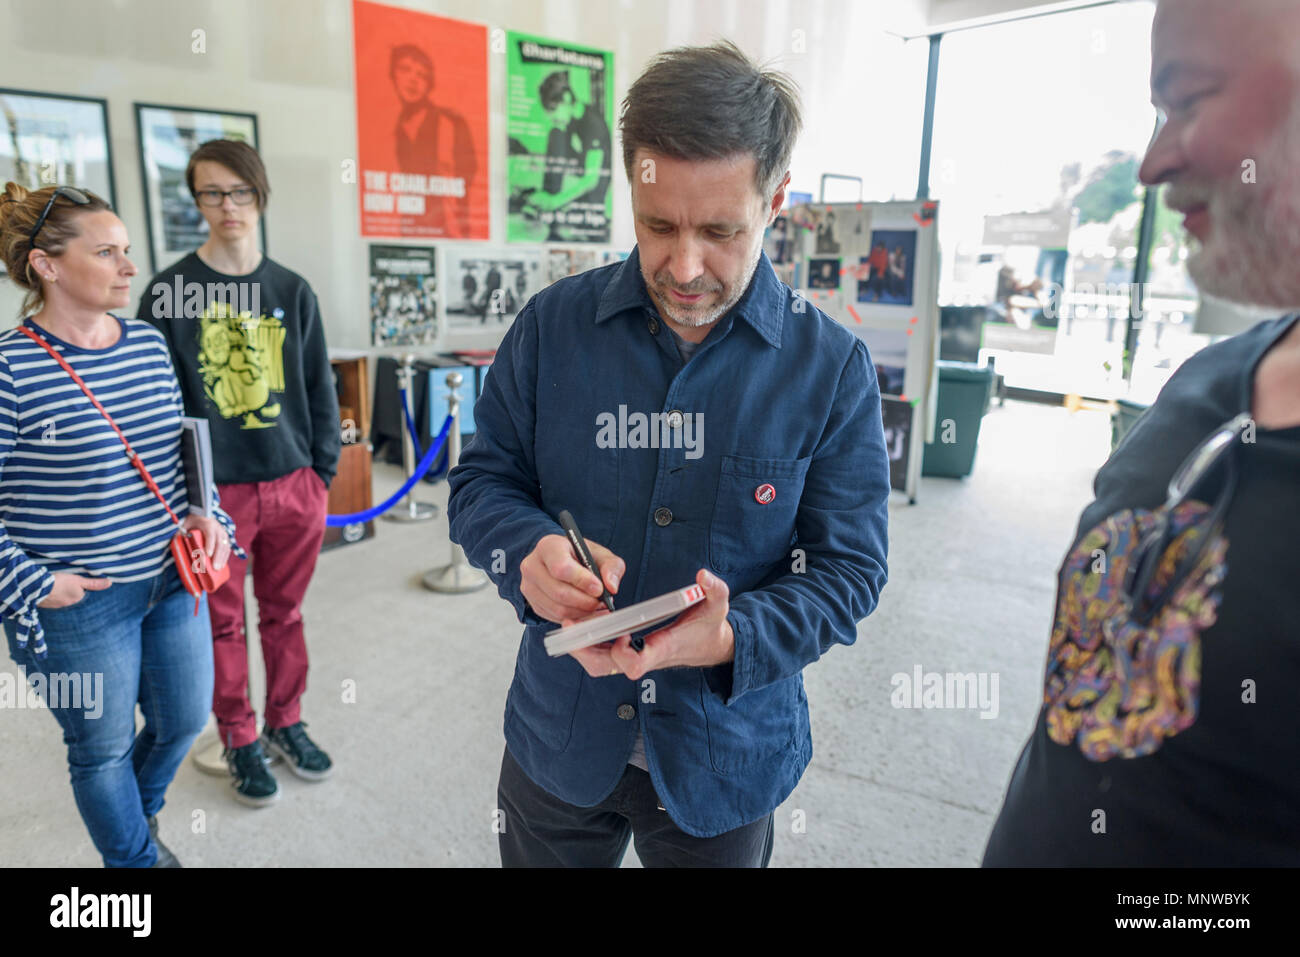 Northwich,Cheshire UK, May 19, 2018. Film actor and director Paddy Considine signs an autograph for a fan at the Charlatans exhibition with his wife Shelley close behind at the North By Northwich fesival, Barons Quay, Northwich, Cheshire, Uk. Credit: Ian Hubball/Alamy Live News Stock Photo